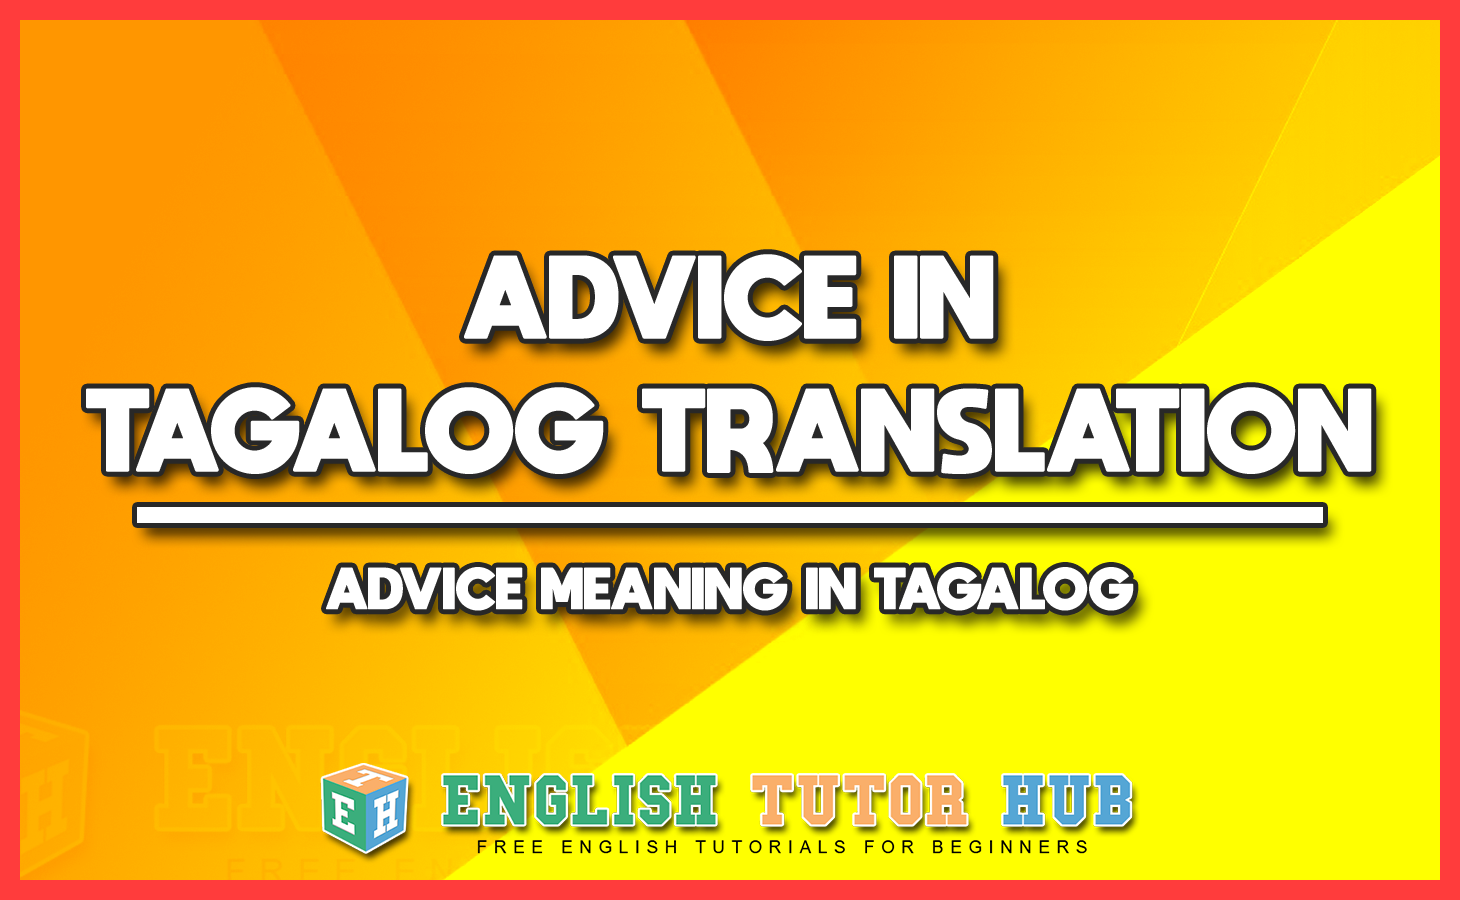 ADVICE IN TAGALOG TRANSLATION - ADVICE MEANING IN TAGALOG